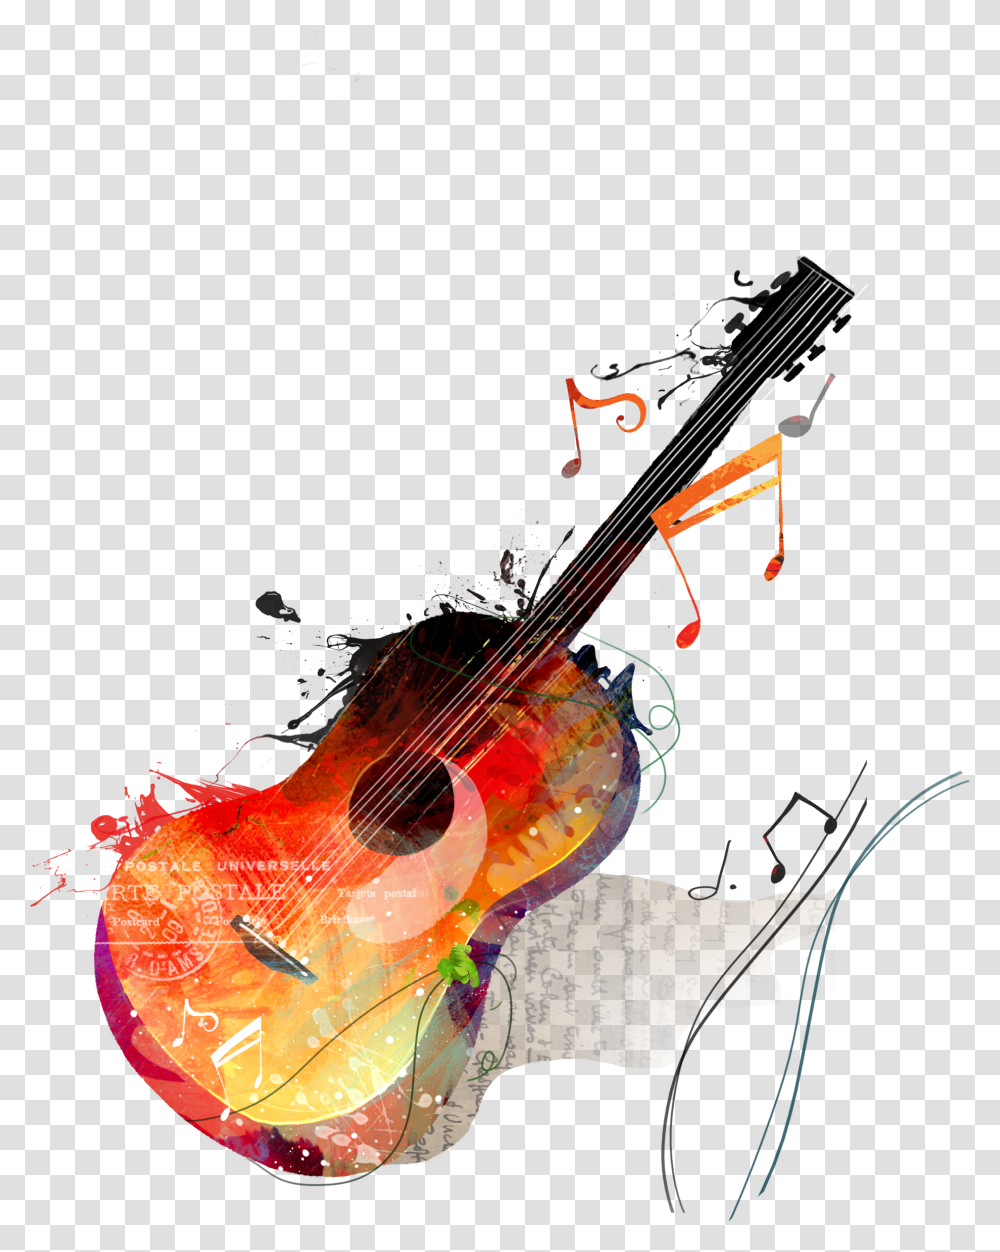 Watercolor Guitar Canvas Painting Drawing Free Clipart Musical Instruments, Leisure Activities, Cello, Violin, Fiddle Transparent Png